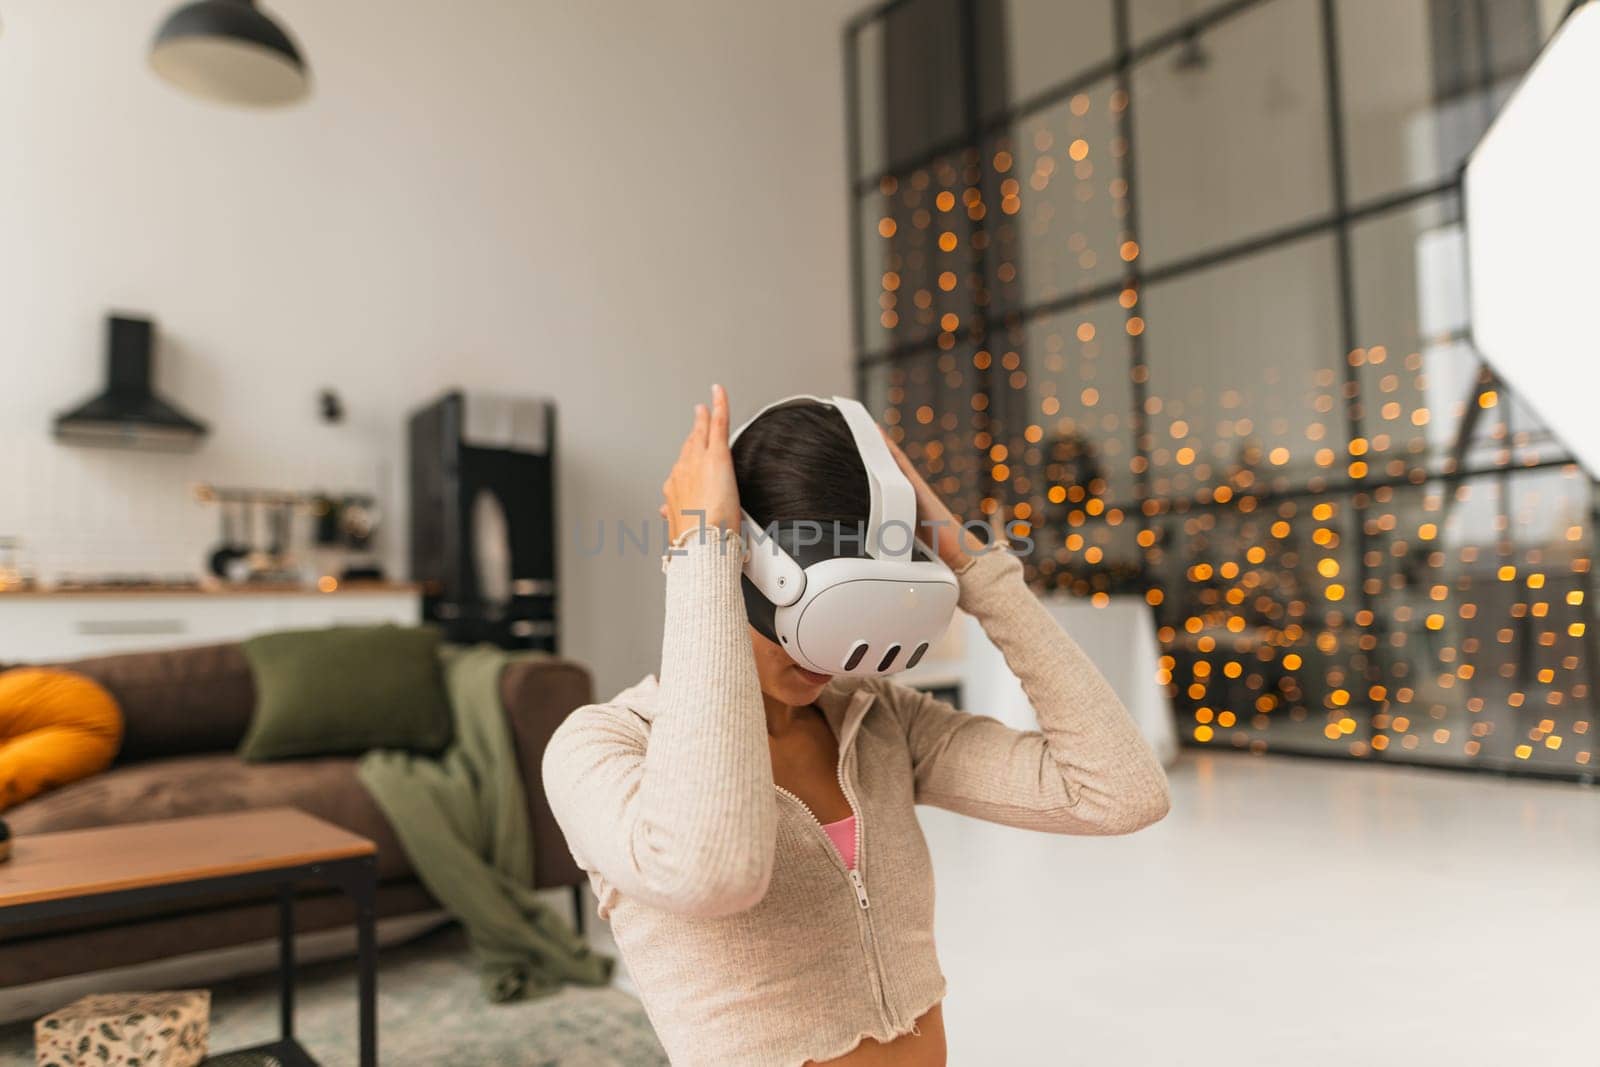 During the festive Christmas season, a fitness coach hosts online workout sessions at home using a virtual reality headset. by teksomolika